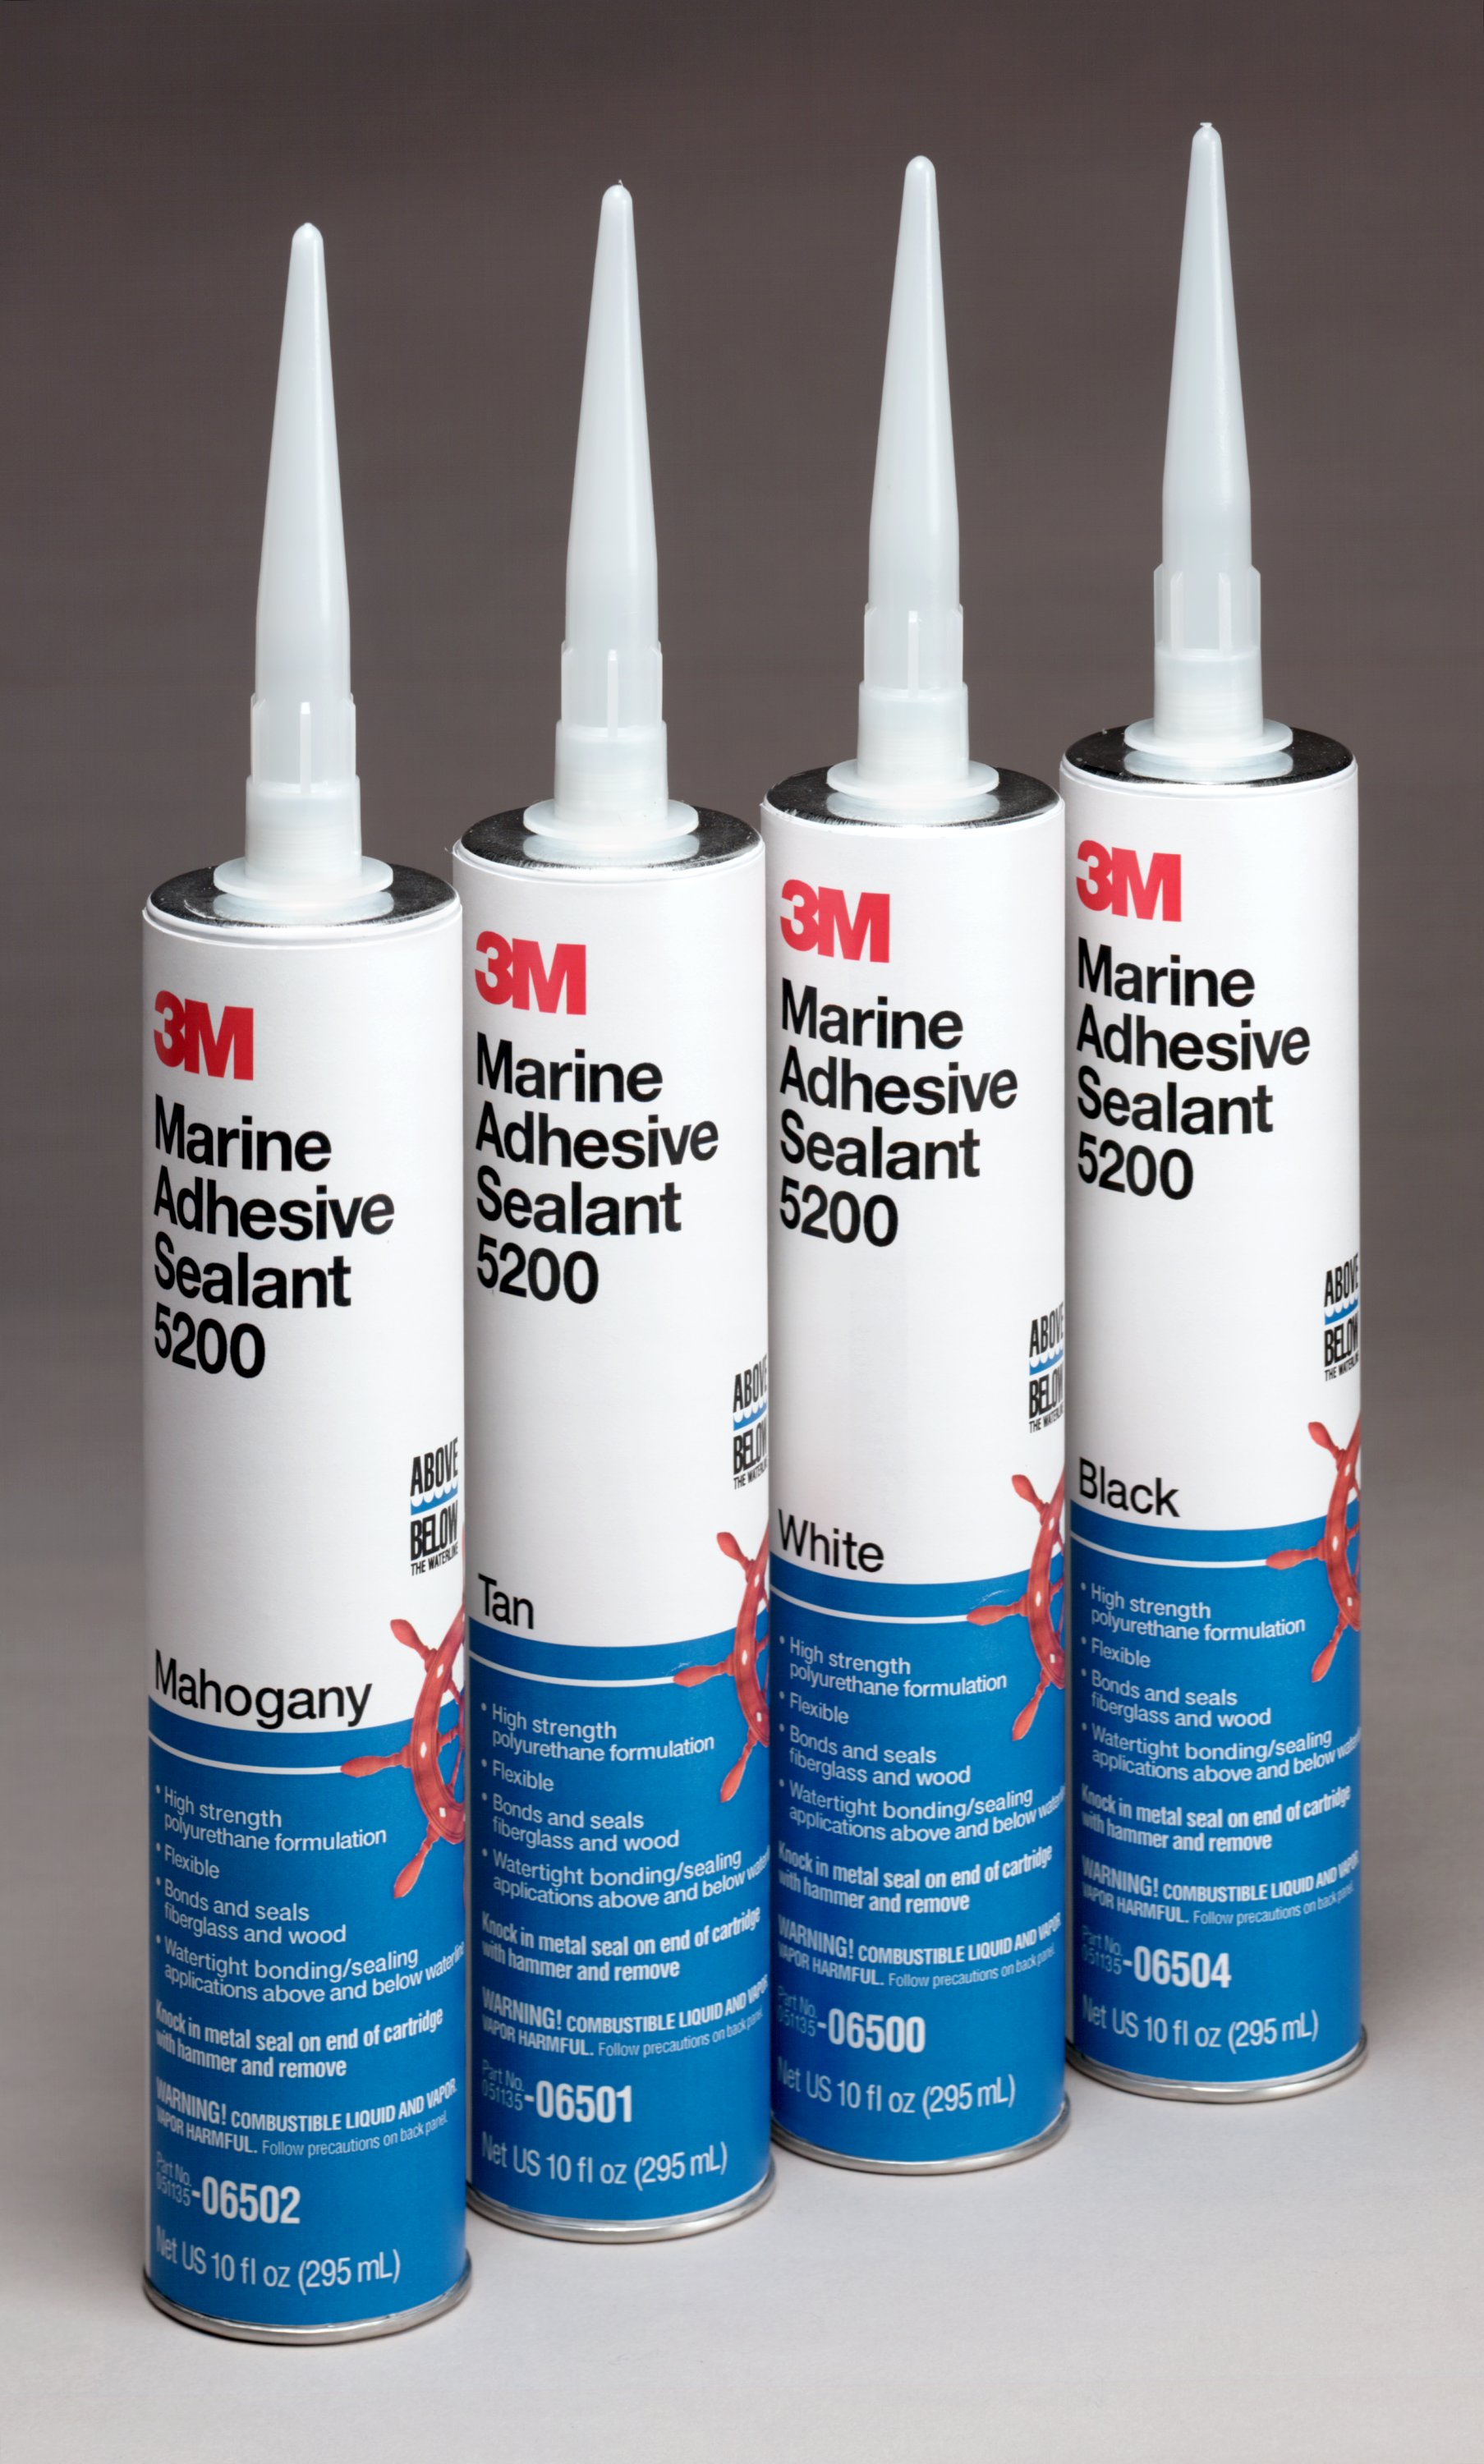 3M™ Marine Adhesive Sealant 5200 Fast Cure offers permanent adhesion to wood, gelcoat and fiberglass.